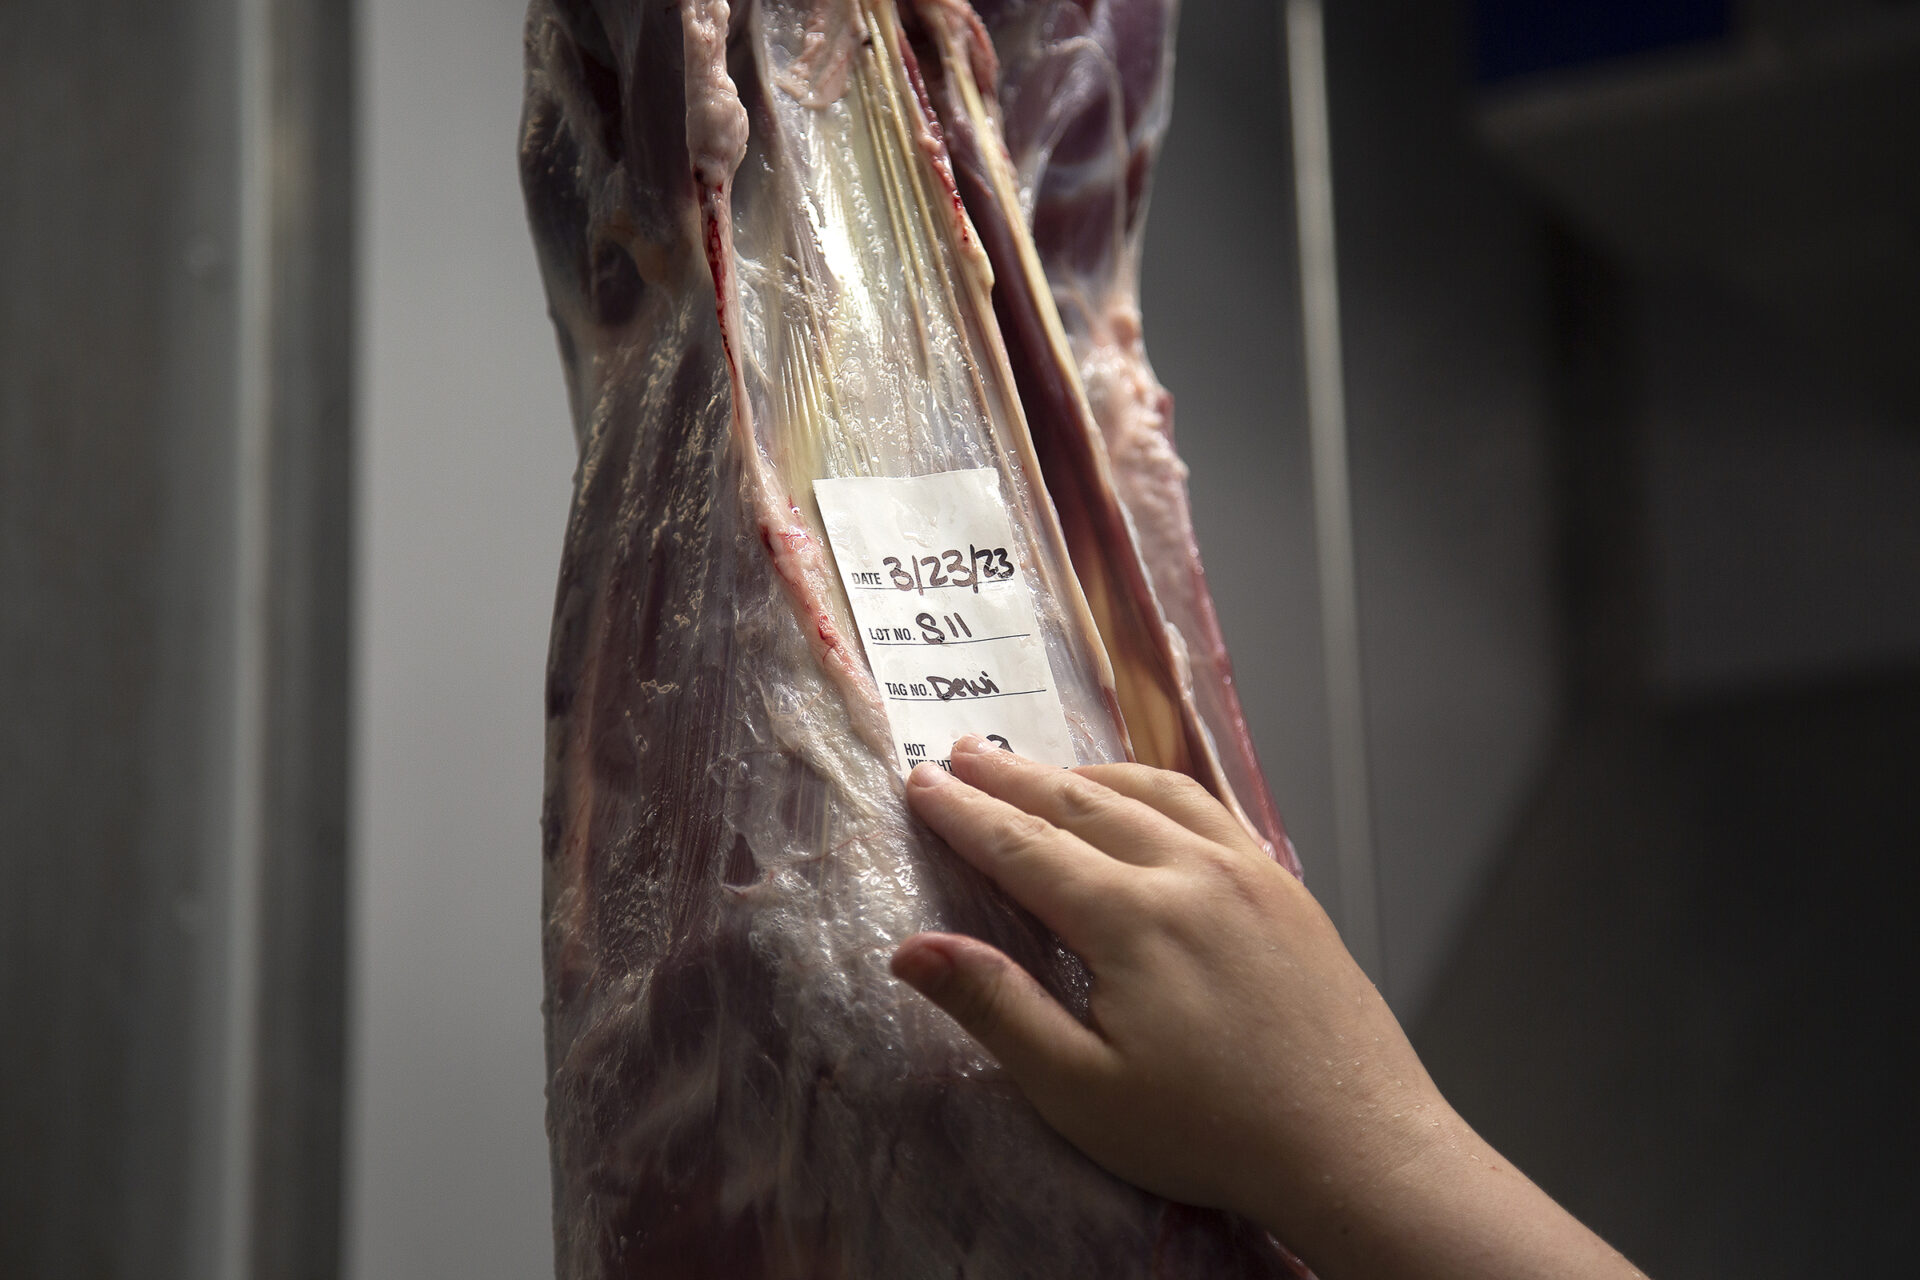 Beef half carcass tagged with lot and traceability number hanging in a Friesla modular harvest unit drip cooler.